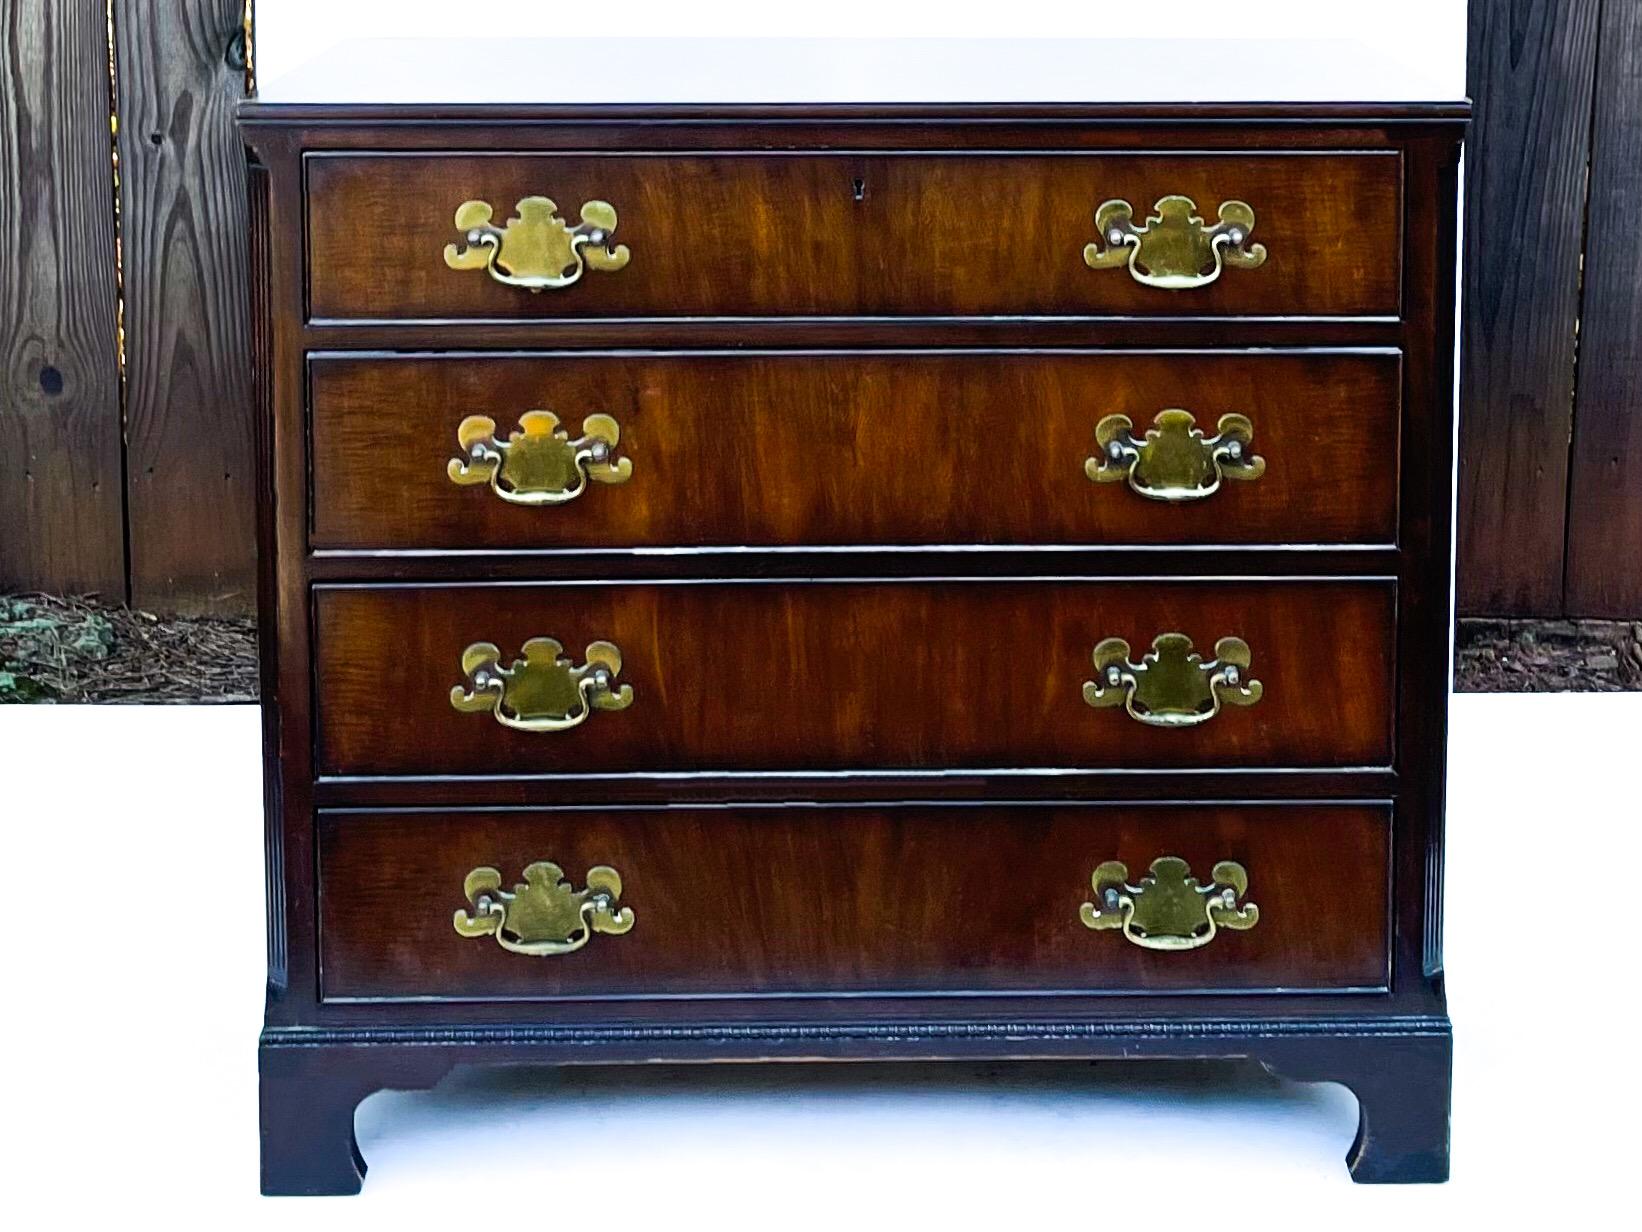 This is a classic pair of mahogany bachelor’s chests by Kittinger. They most likely date to the 50s/60s. Note the regal solid brass hardware and bracket feet. They also have dovetail construction.